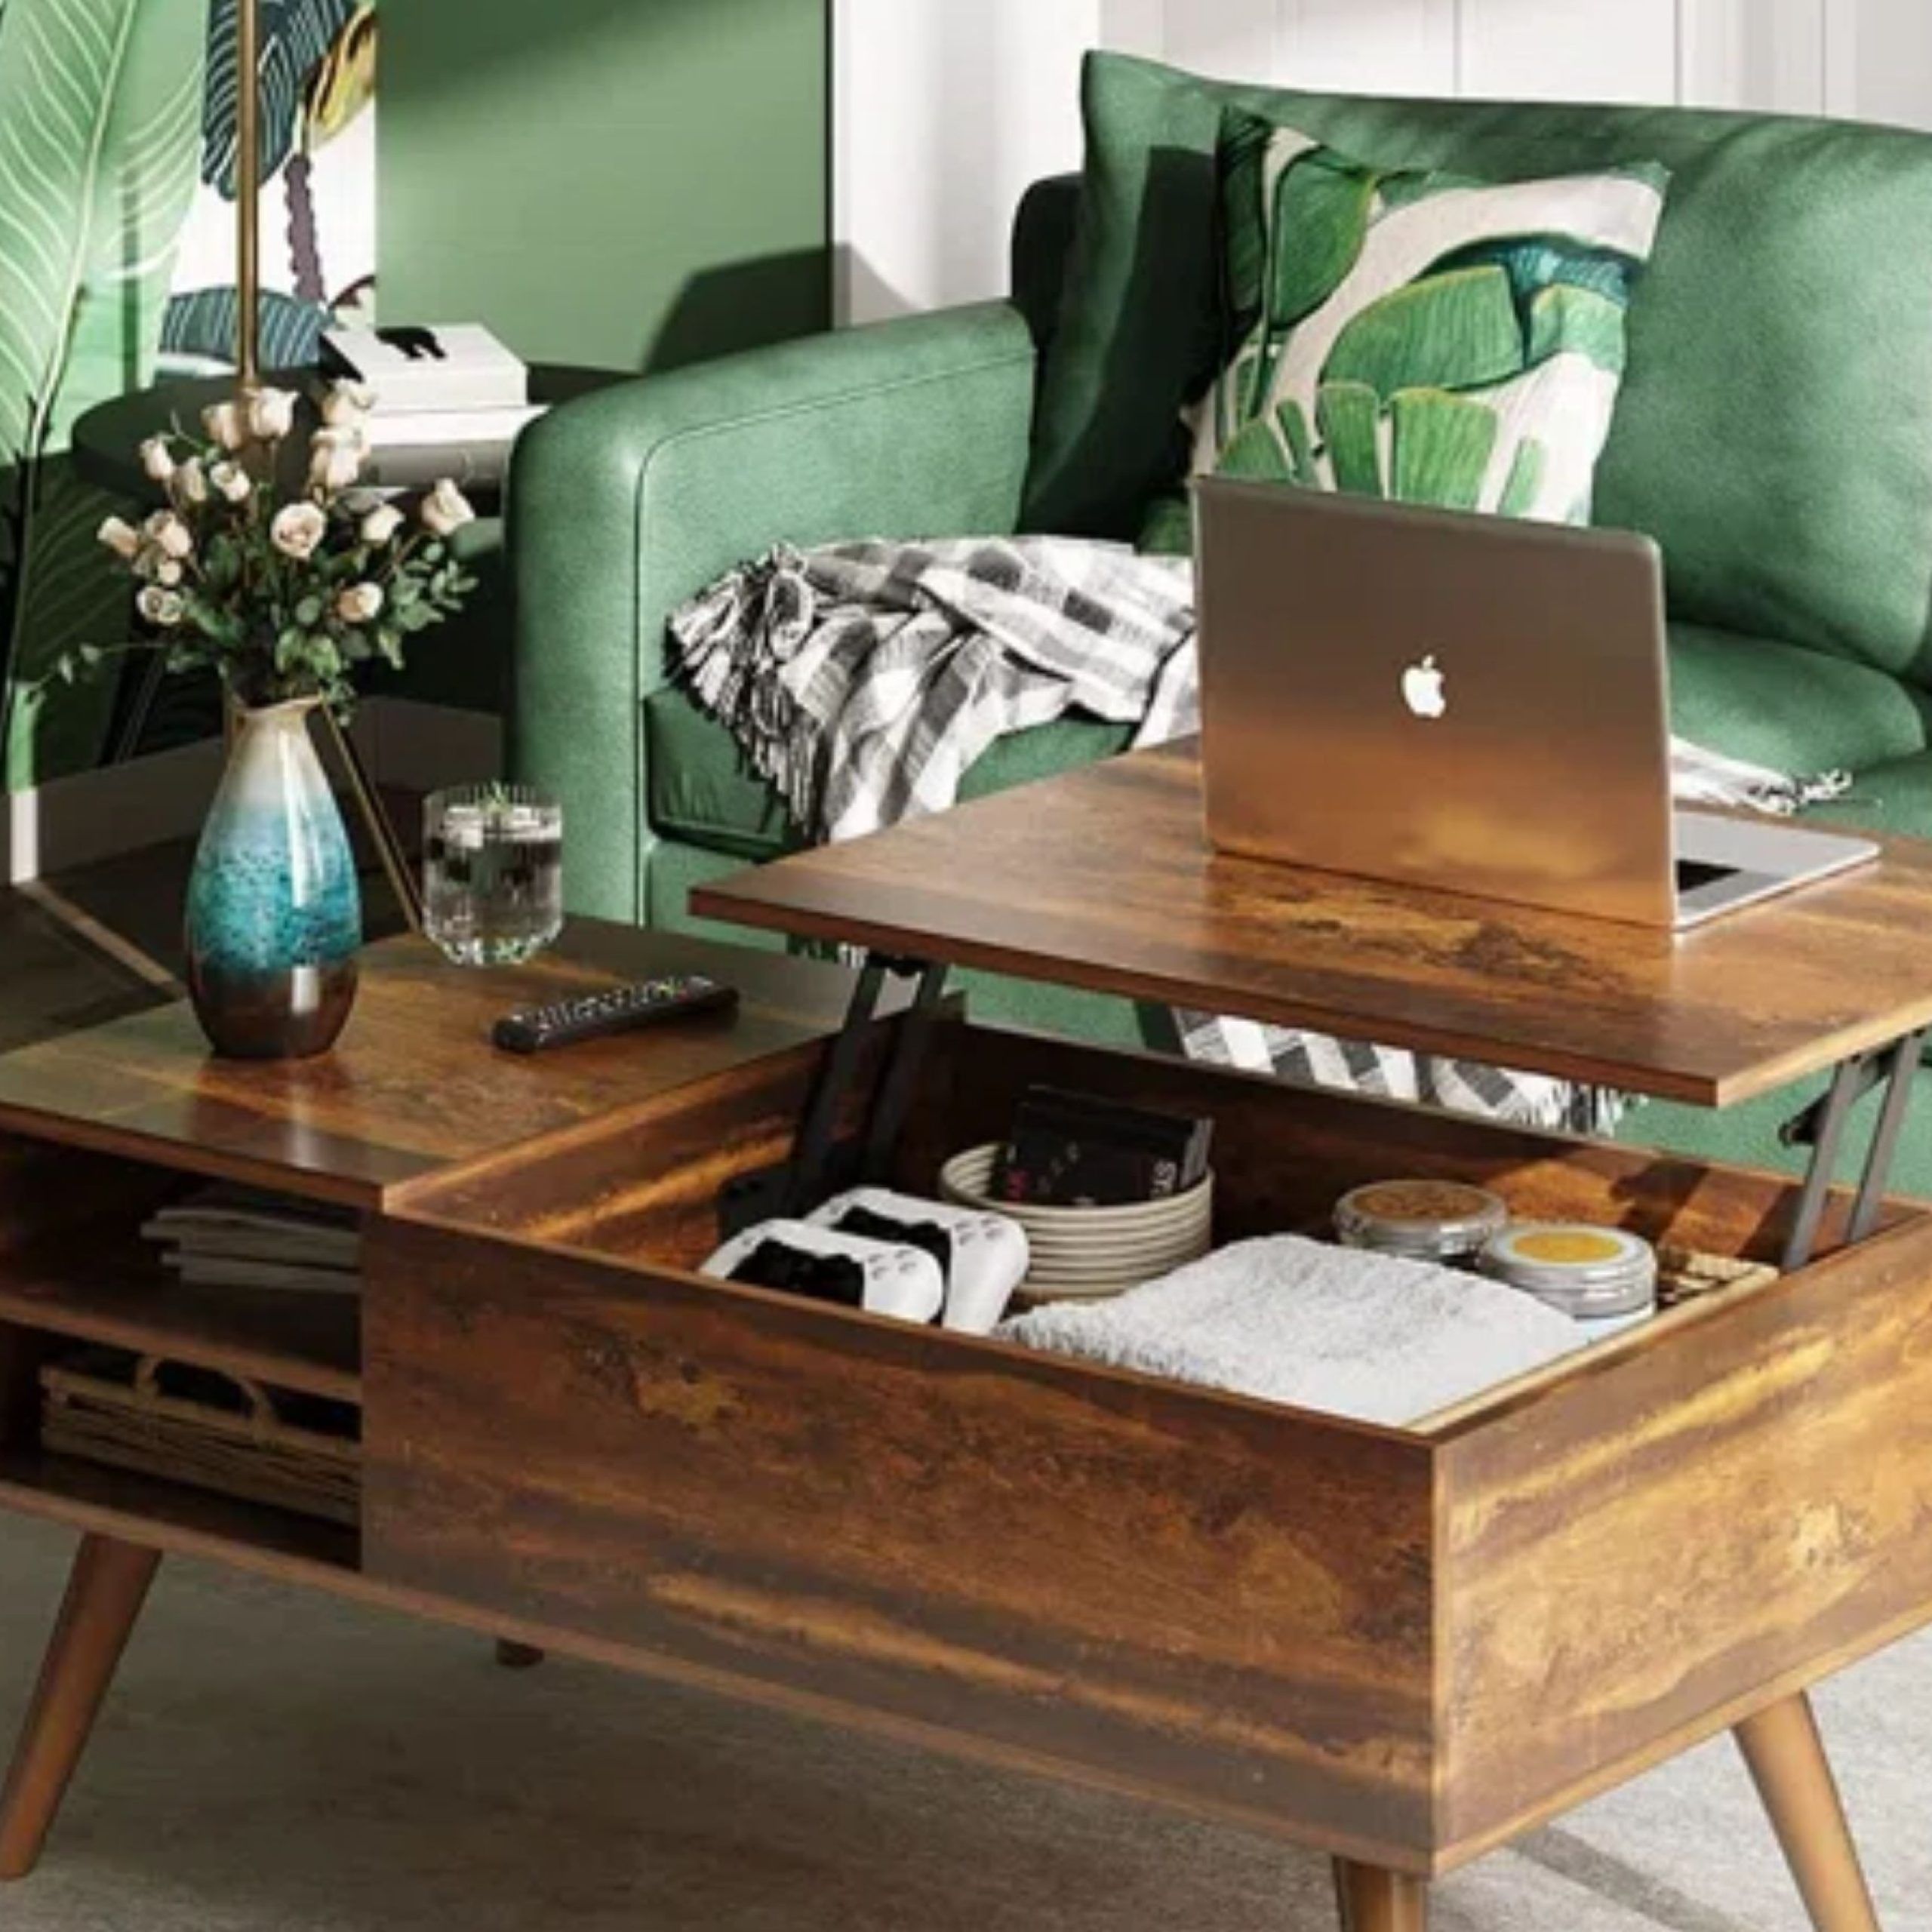 Best Lift Top Coffee Tables: 14 Buys Perfect For Small Spaces | Real Homes Throughout Lift Top Coffee Tables (View 12 of 15)